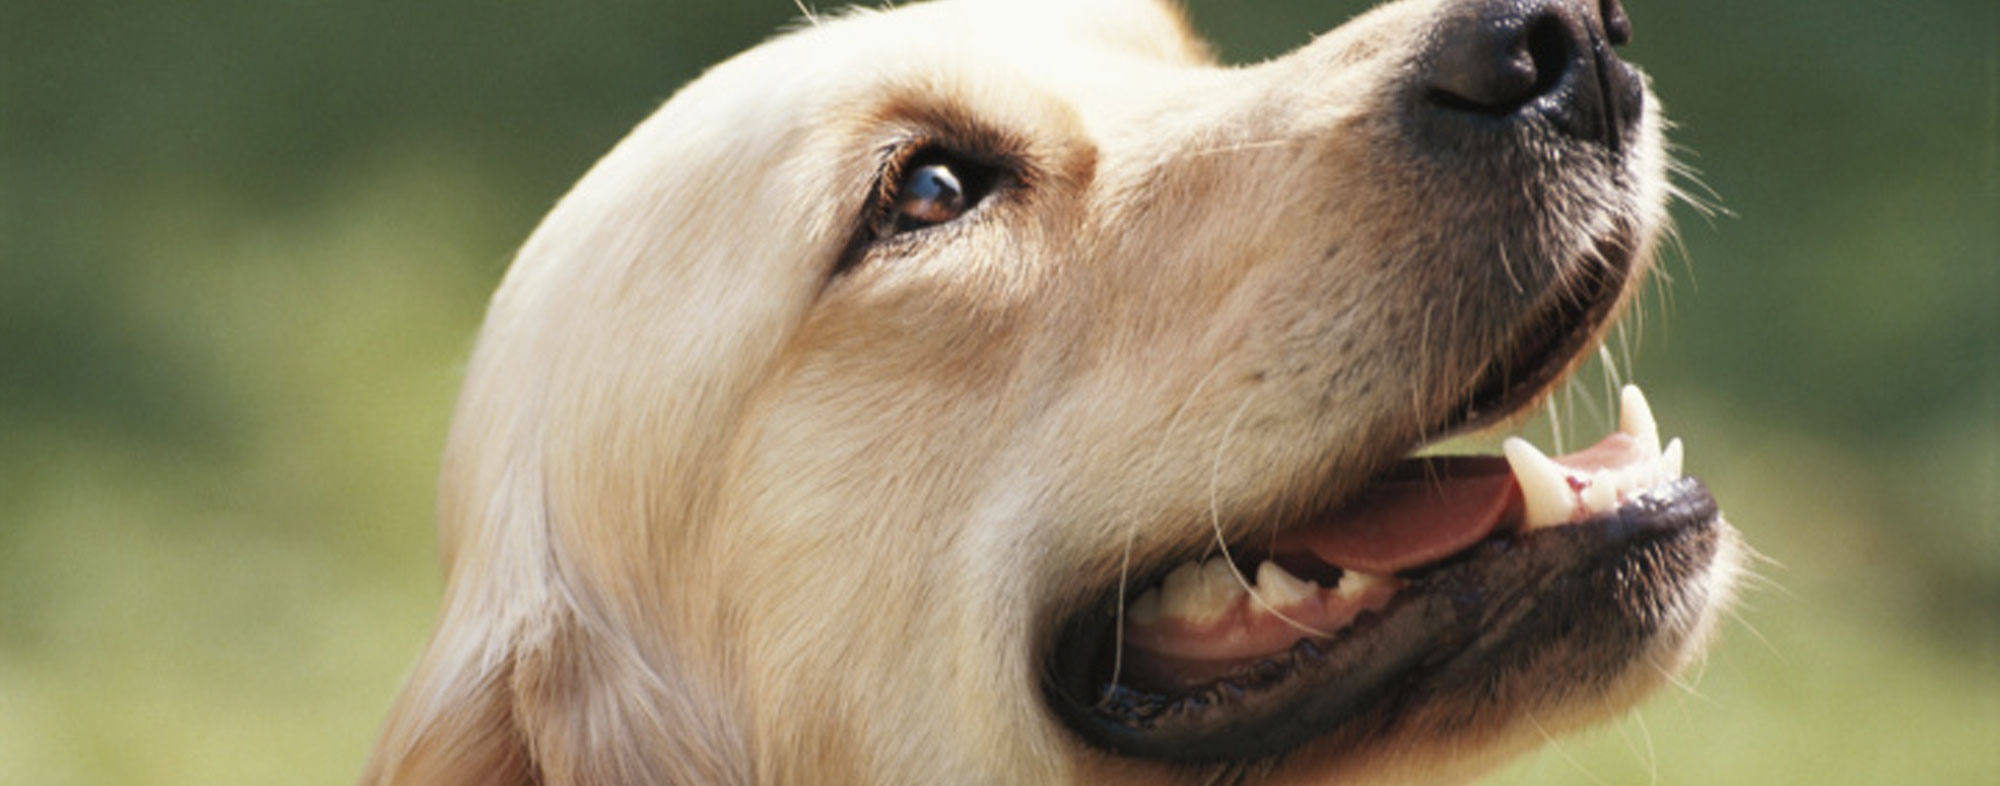 Caring for your canine's teeth will preserve them for their lifetime